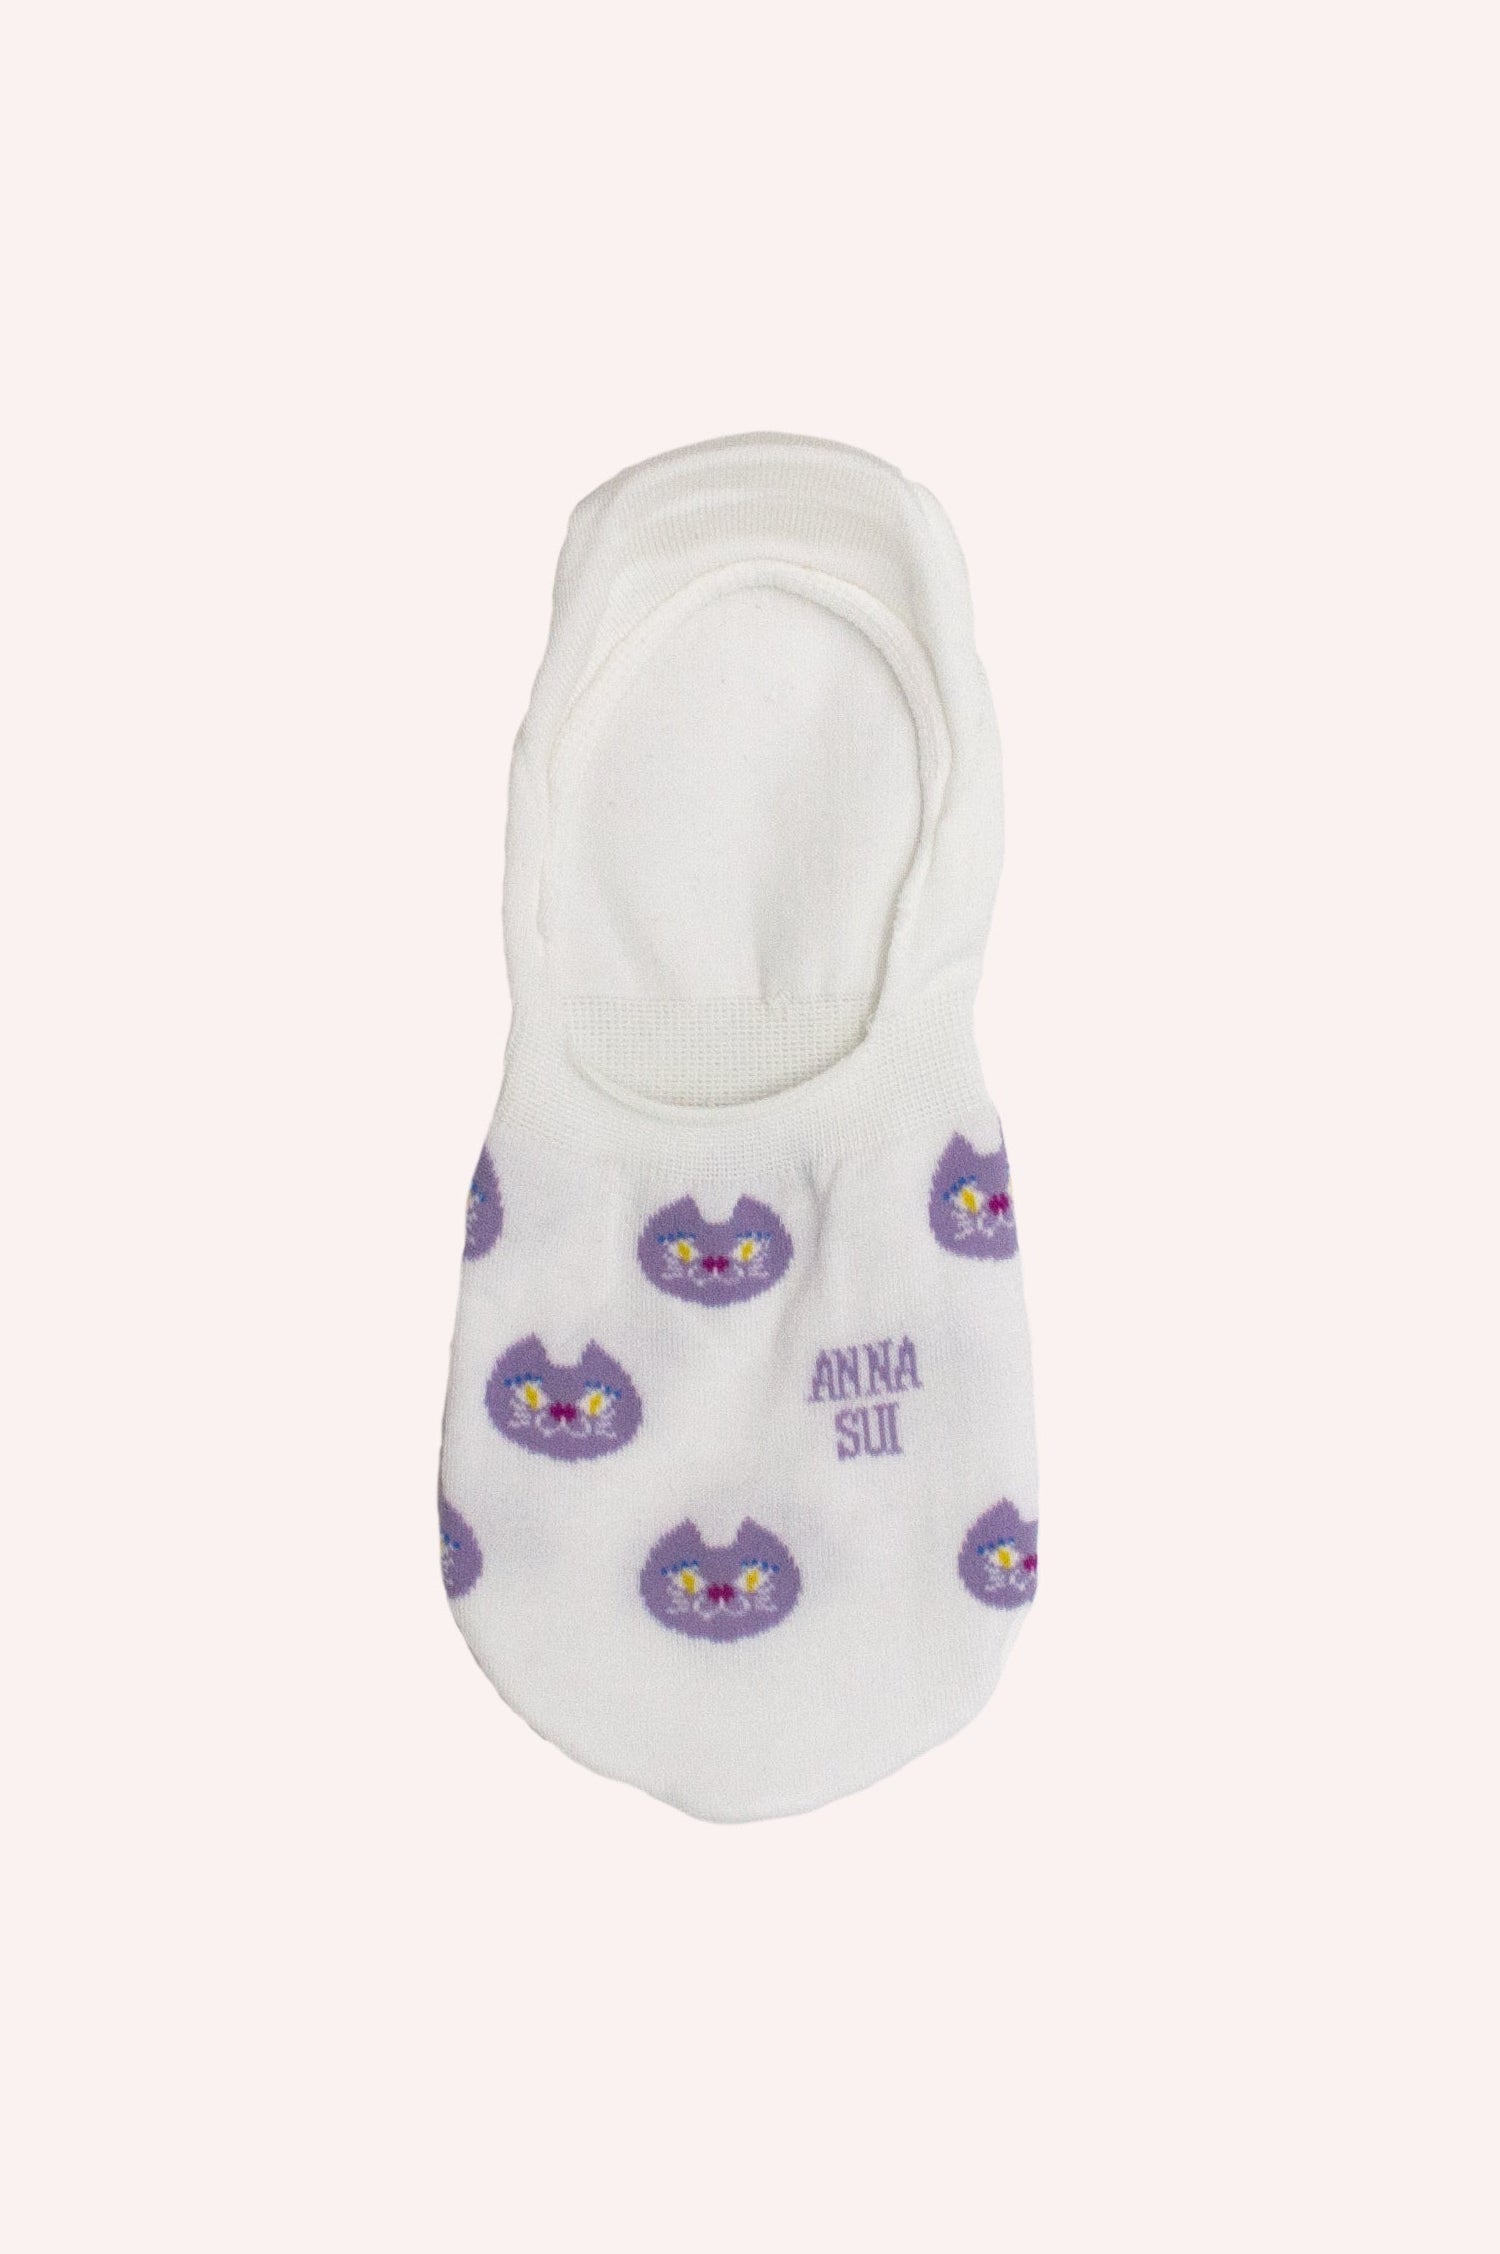 Cat Pattern Socks, white with purple cat’s head with white eyes and mouth, Anna Sui label, short socks